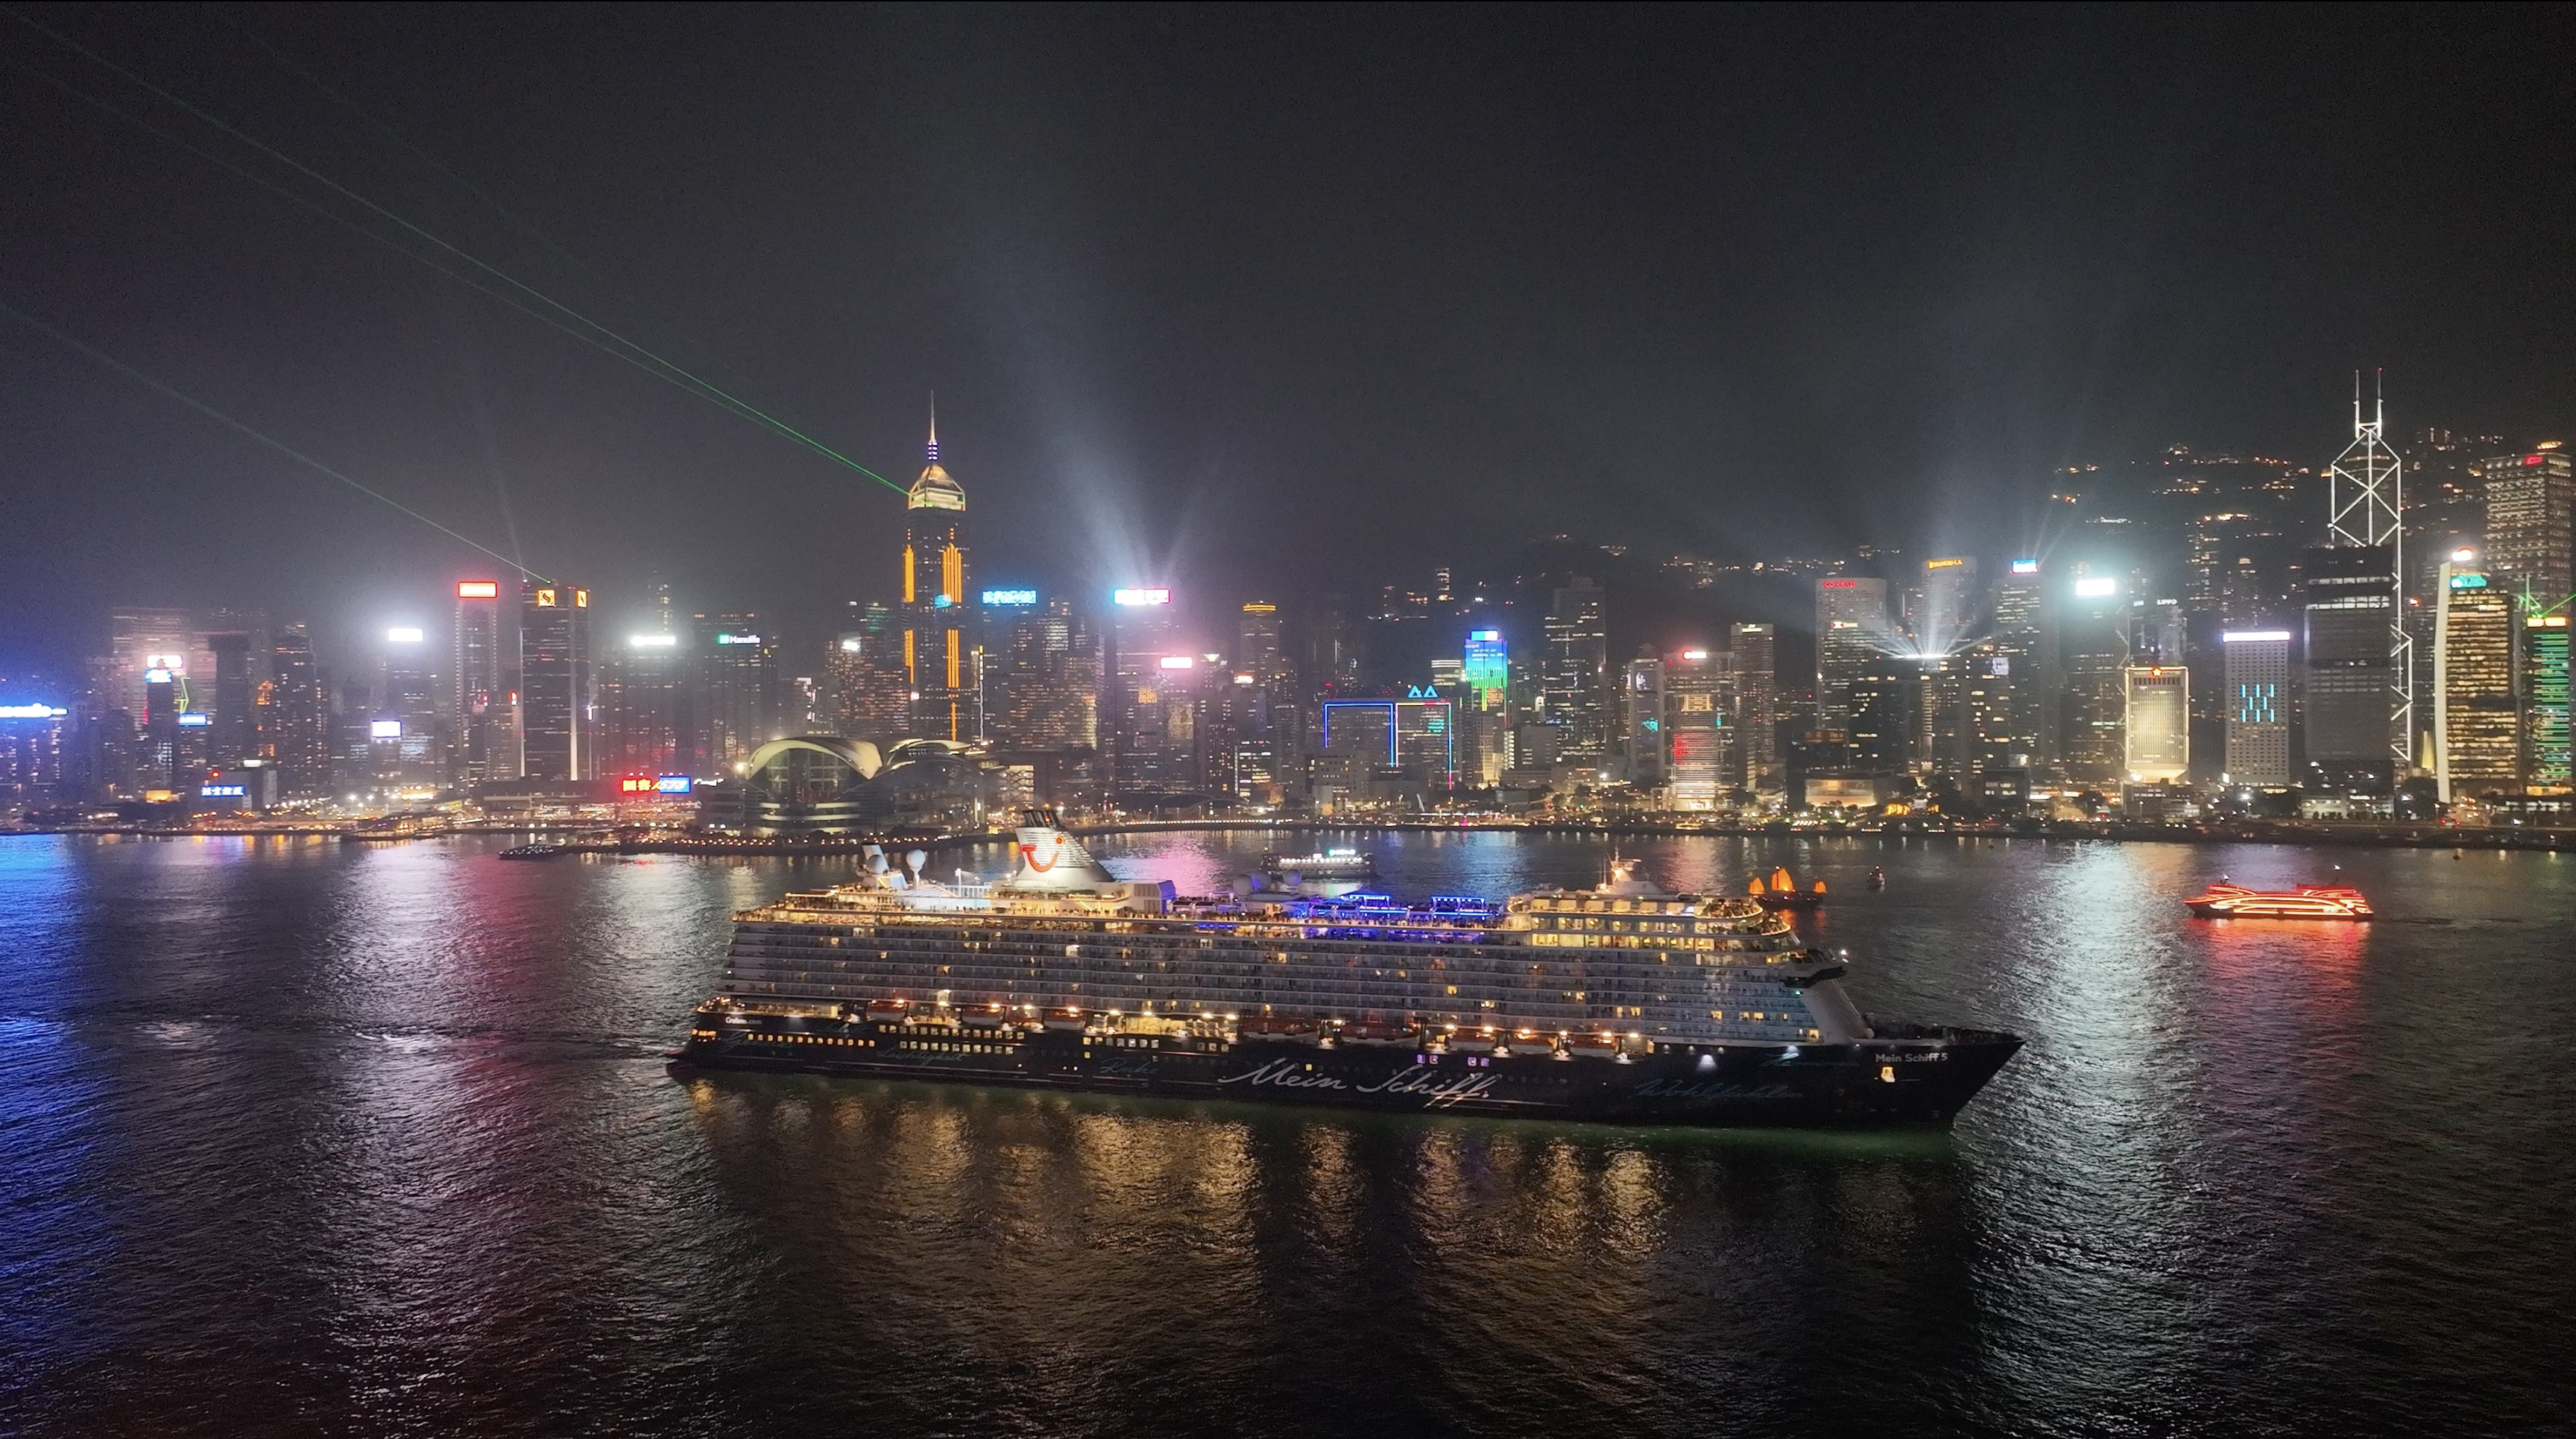 Nighttime view of Hong Kong skyline with a cruise ship in the harbor